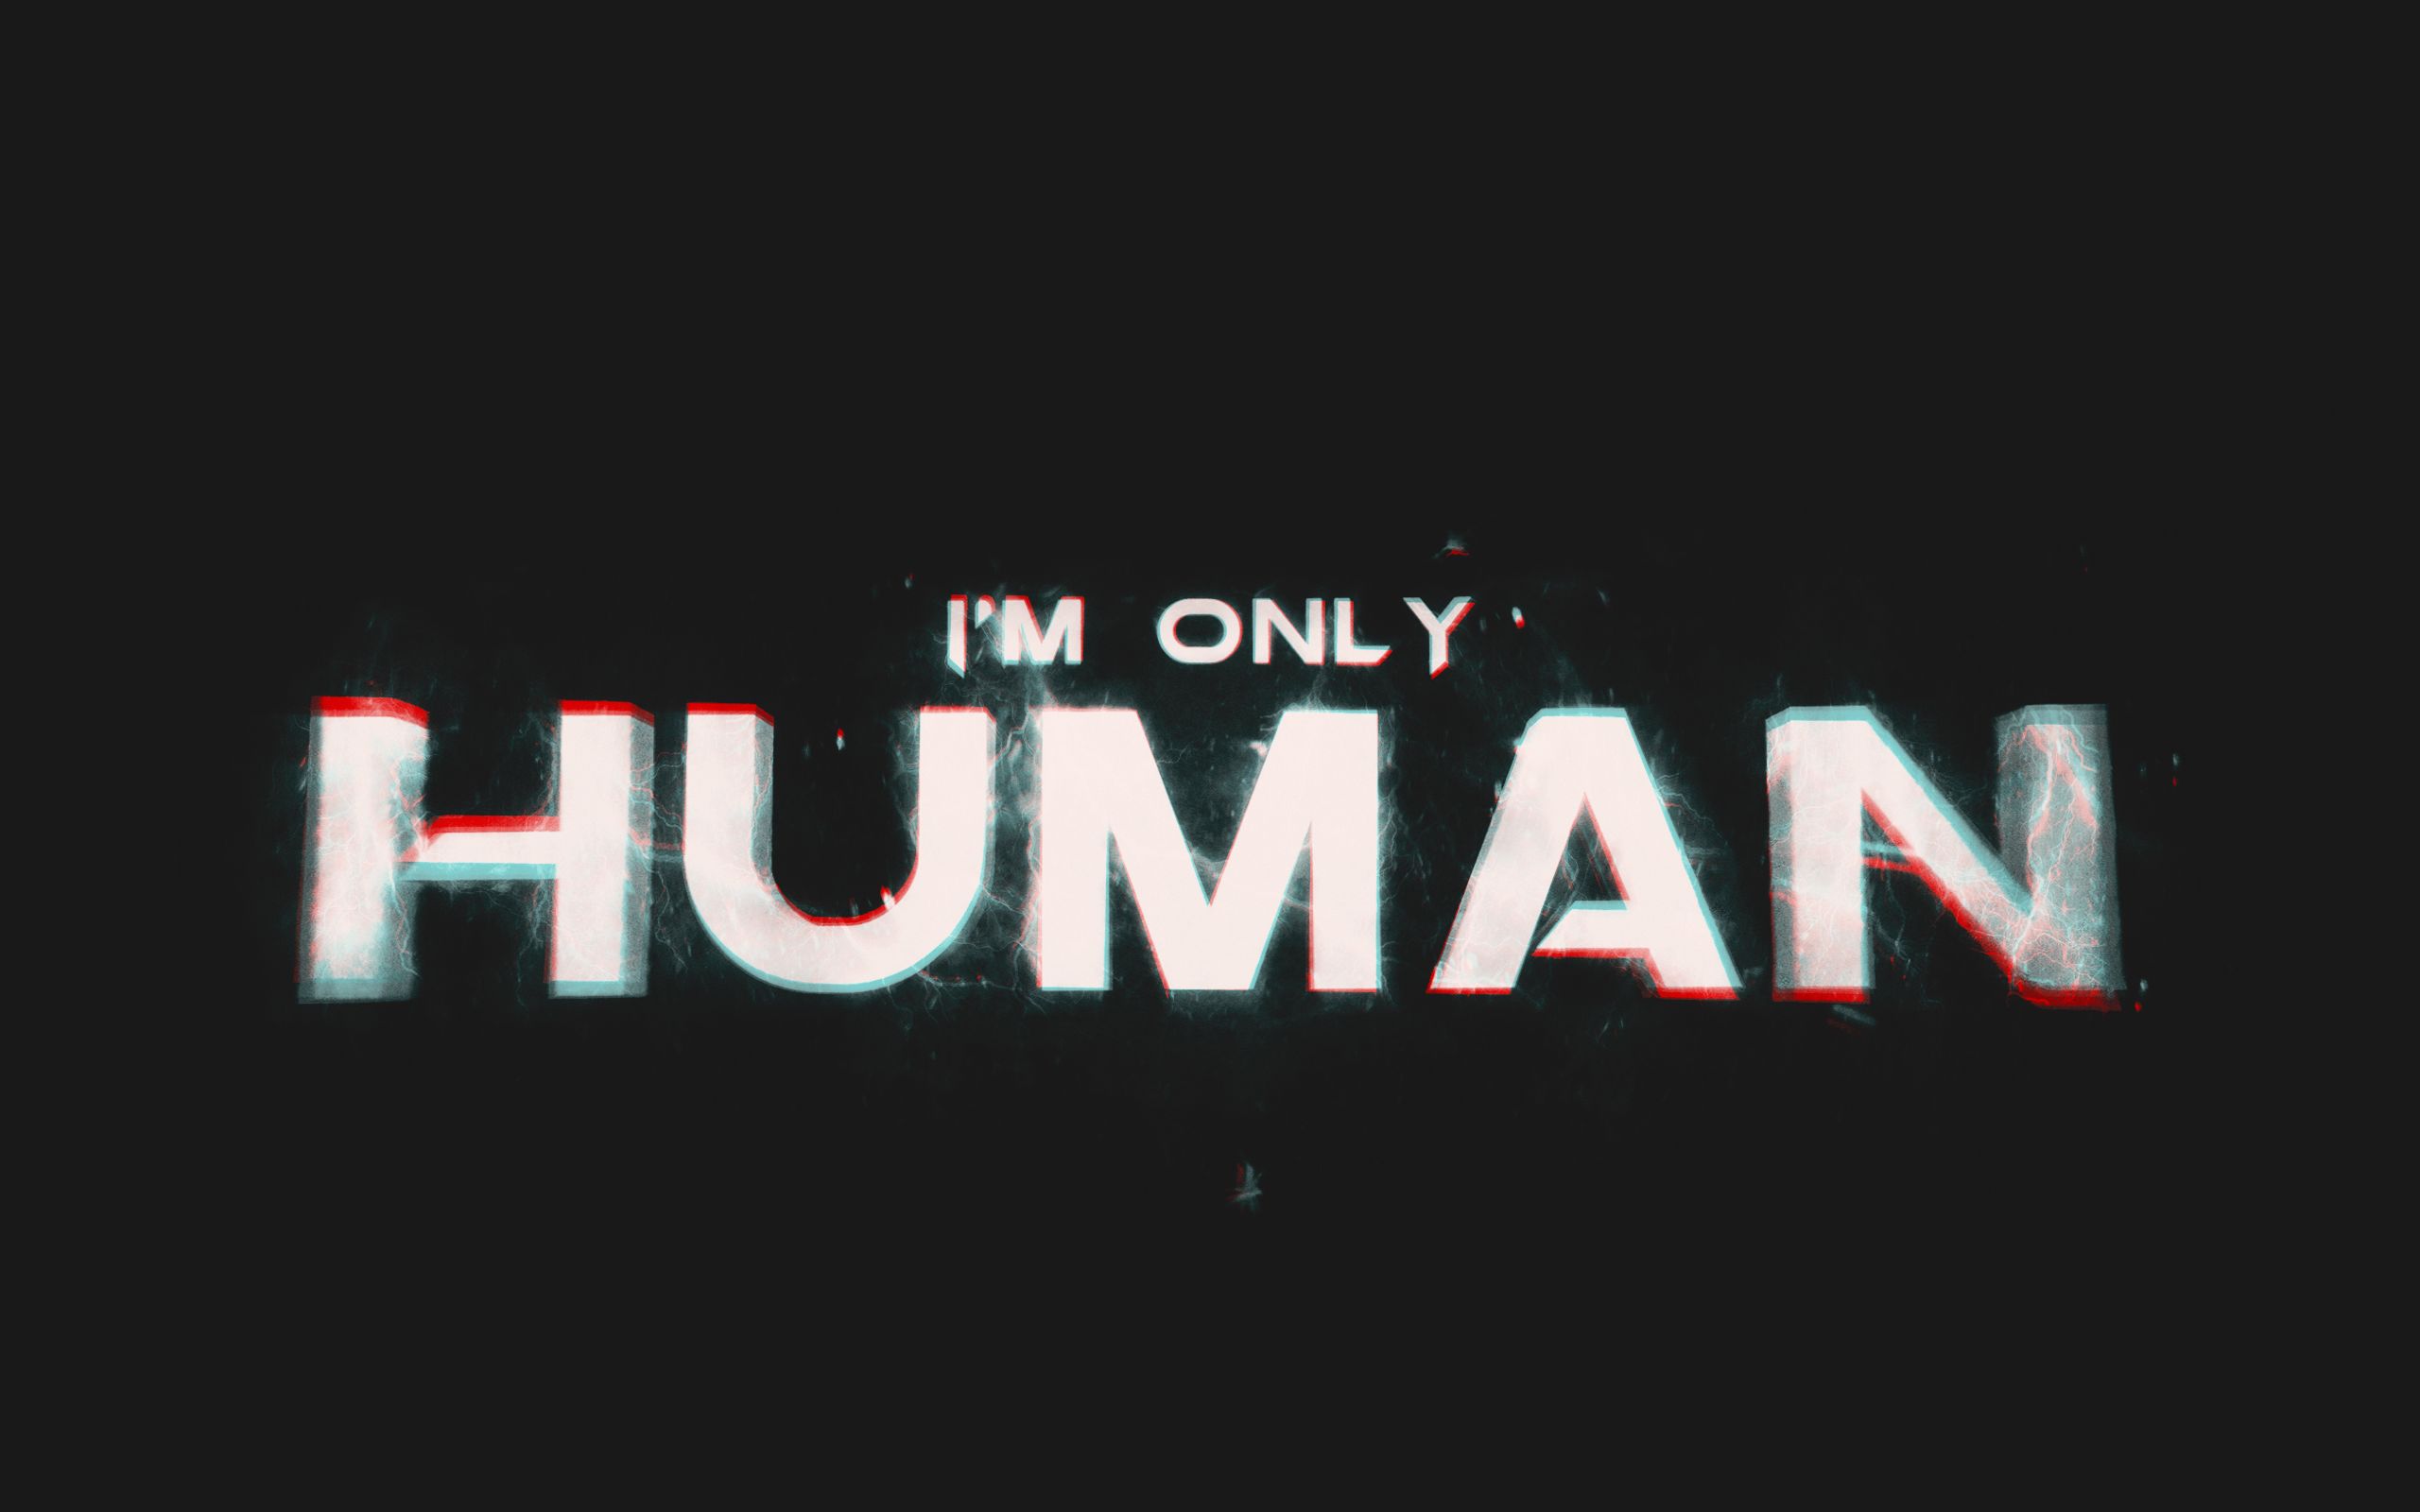 Todd human. I M only Human. Only Human. Only Human Todd Burns. Im only Human after all.